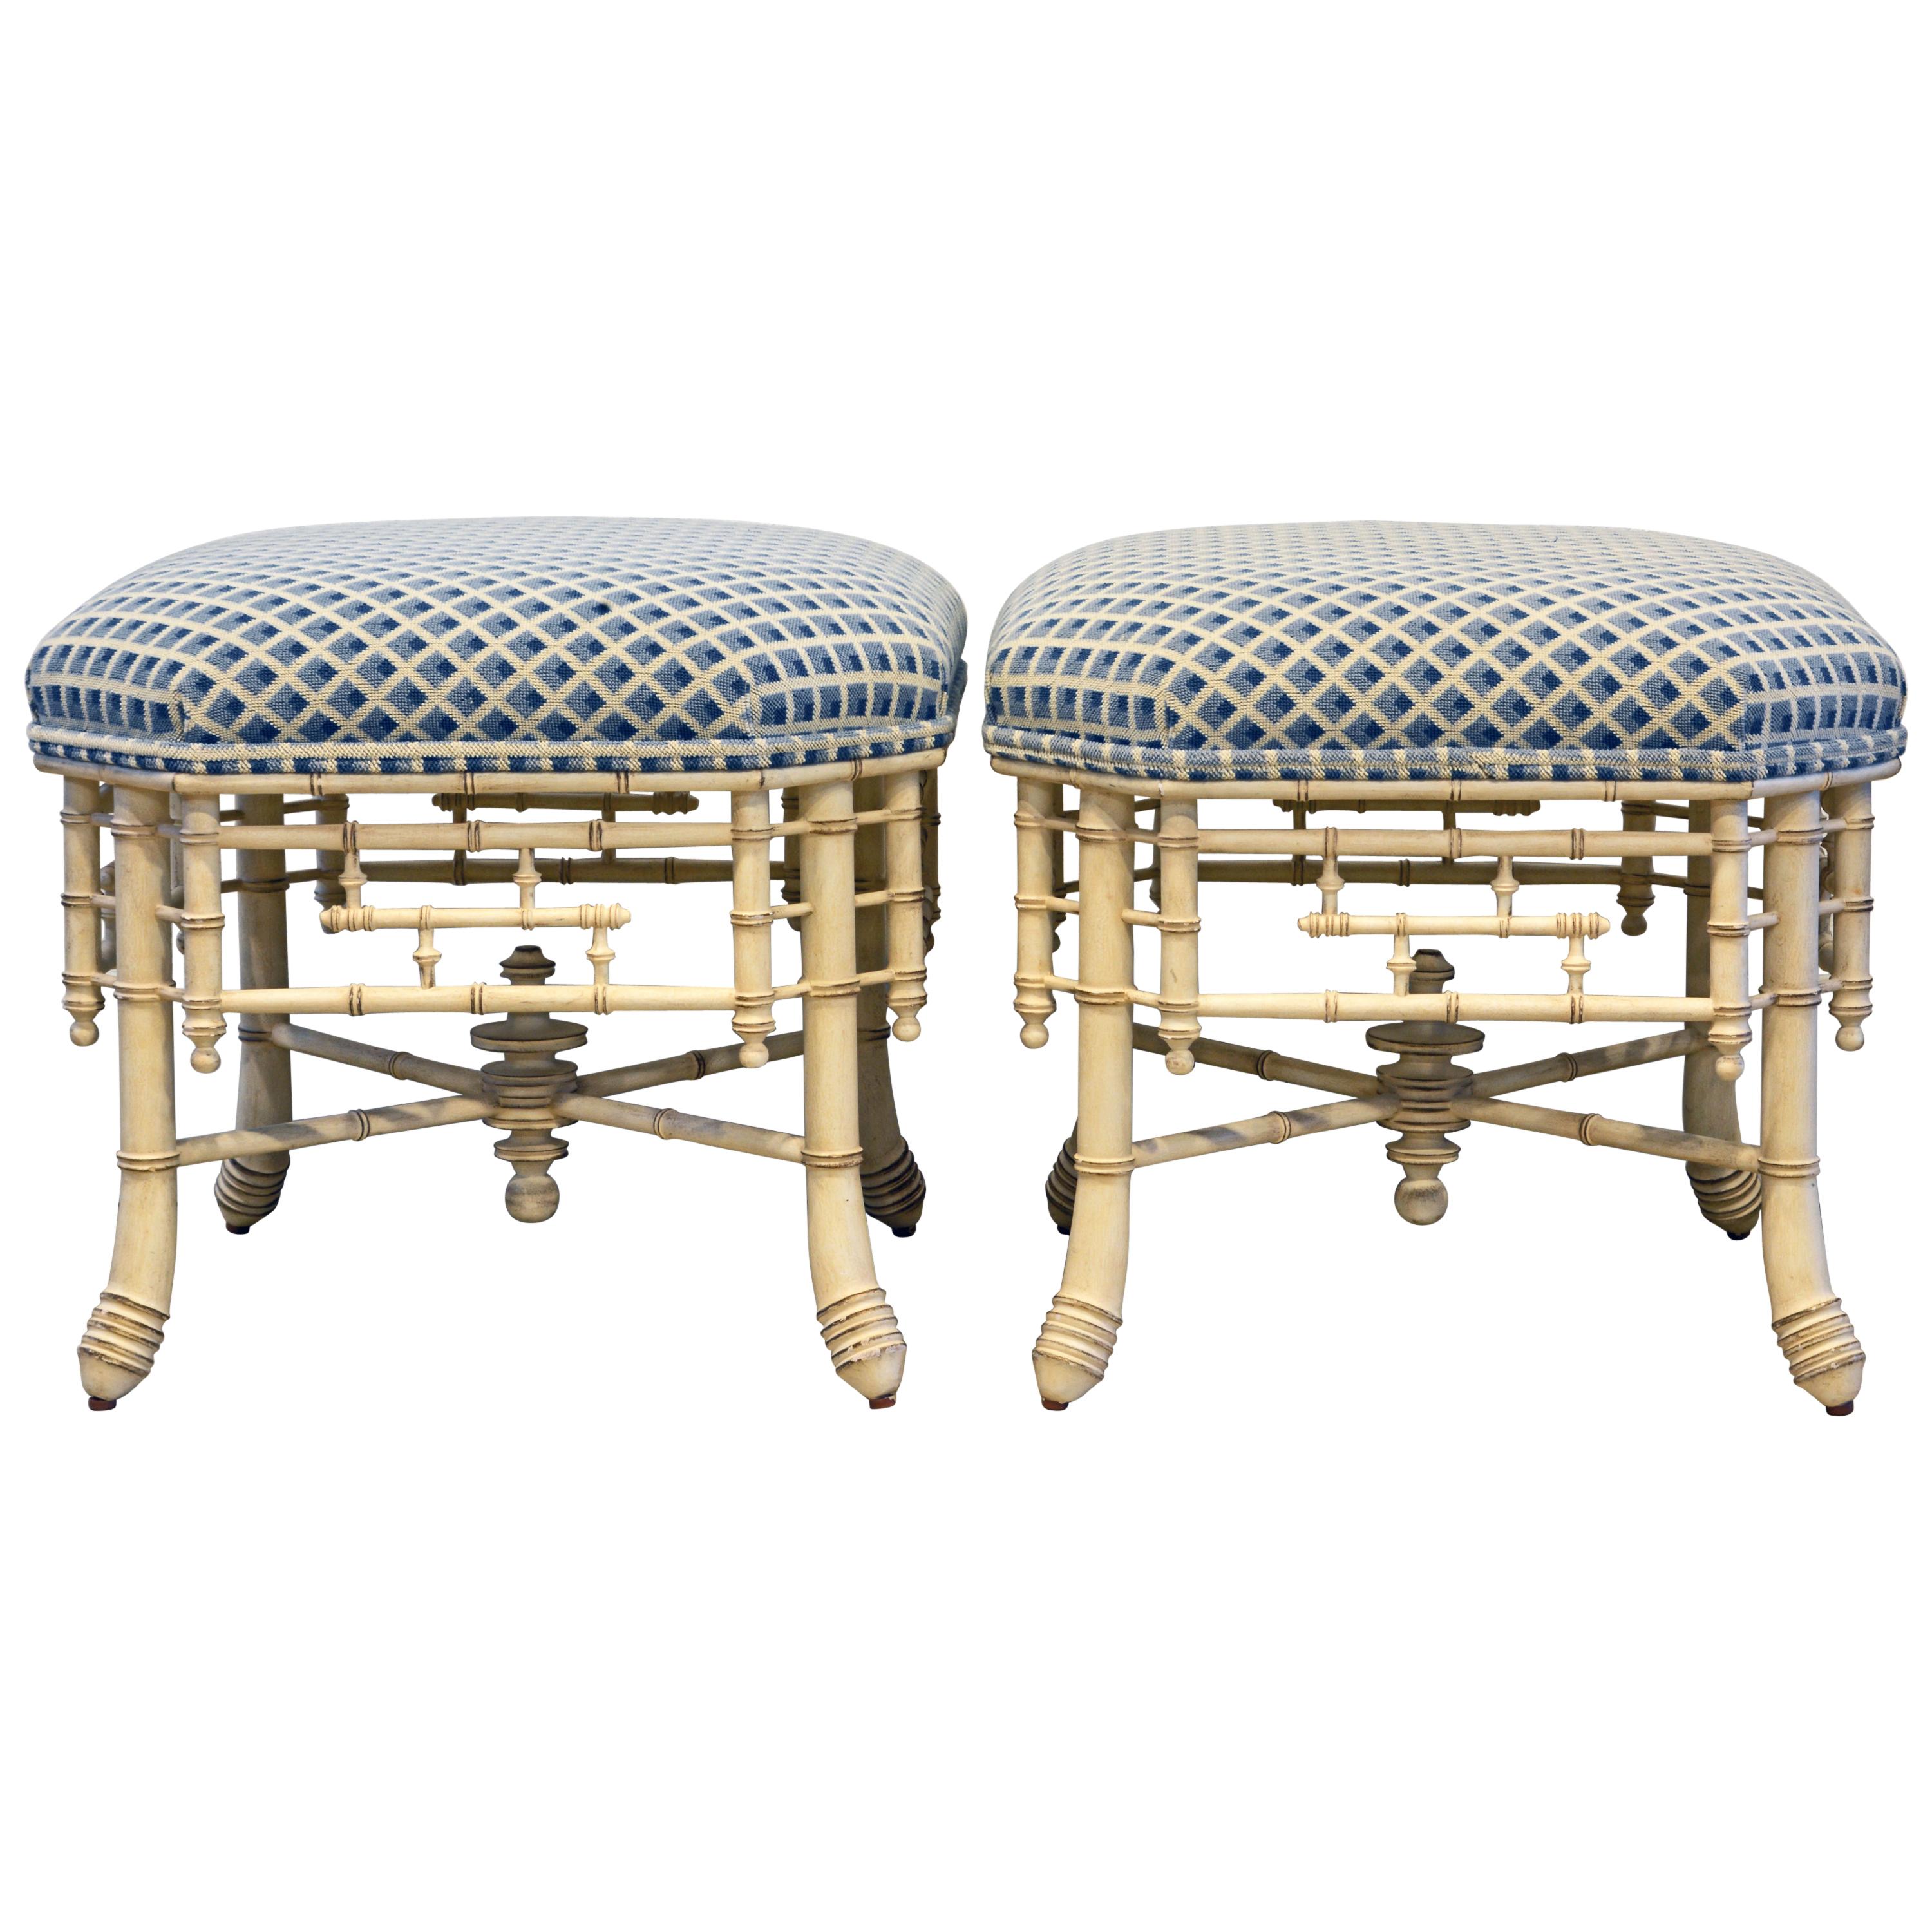 Pair of Vintage Upholstered Faux Bamboo Painted Benches Aesthetic Movement Style